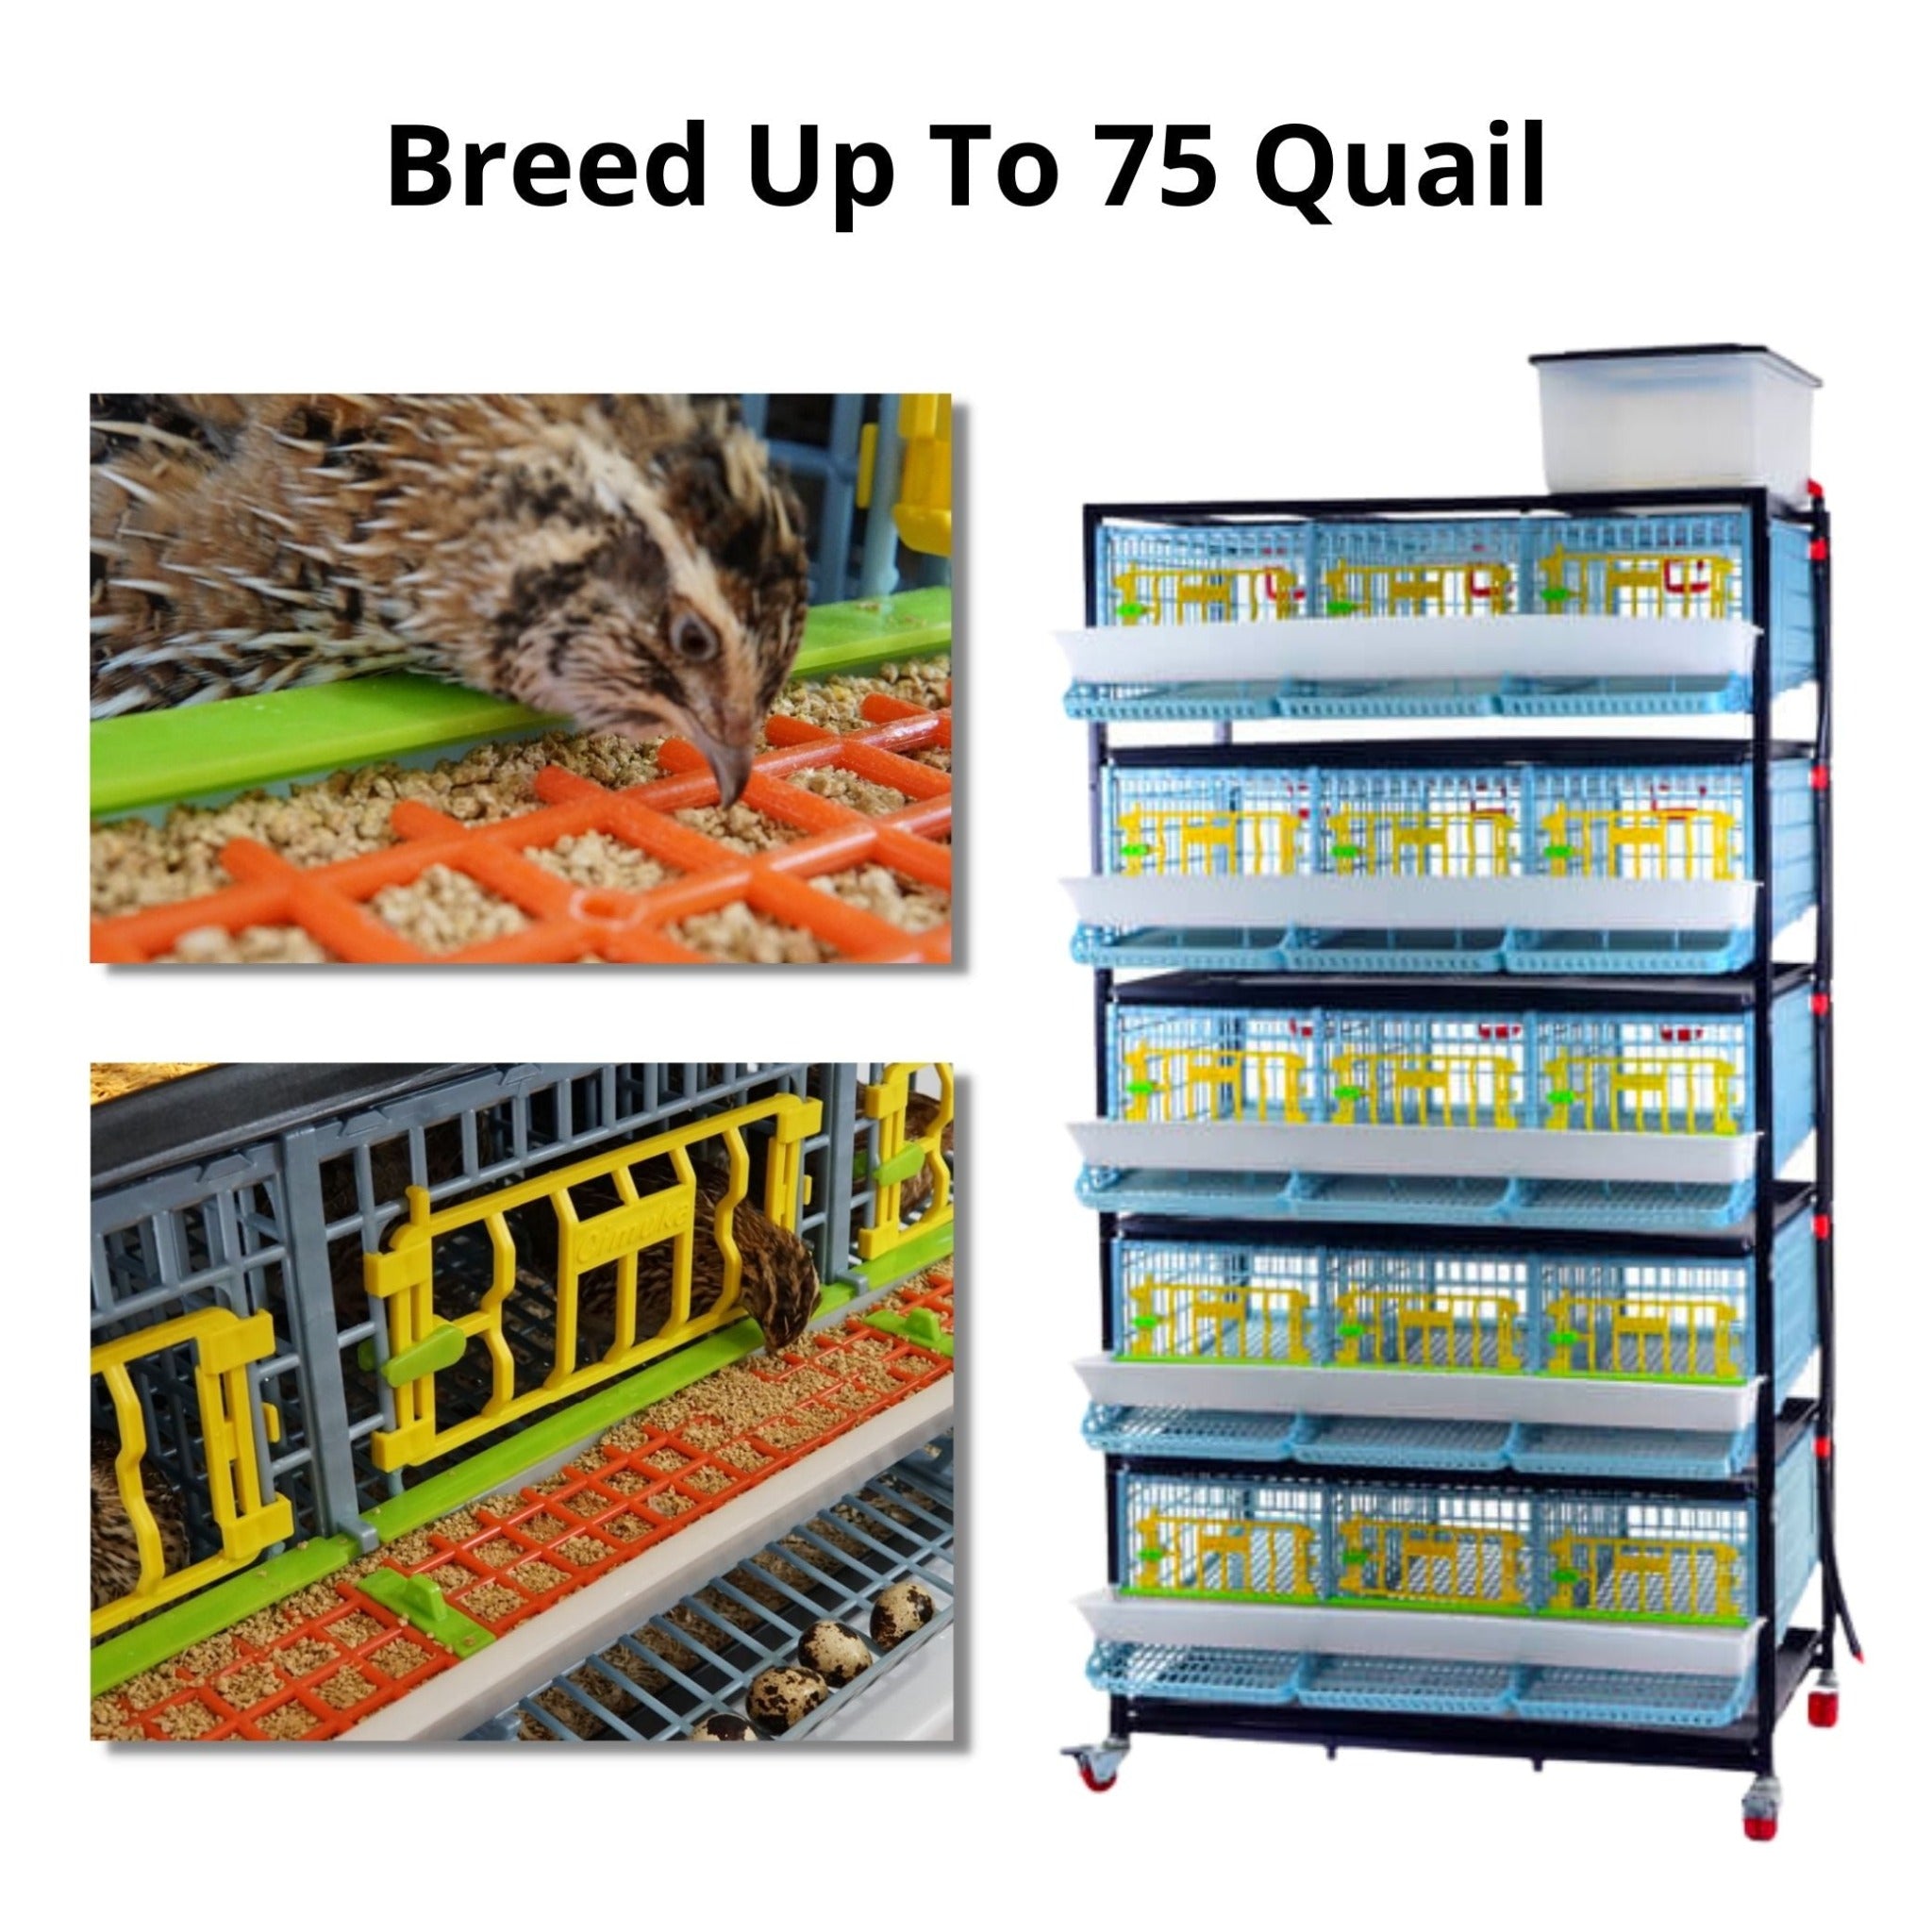 Hatching Time Cimuka. Image shows you can breed up to 75 quail with a 5 layer quail cage system. Image shows quail eating from feeding trough.